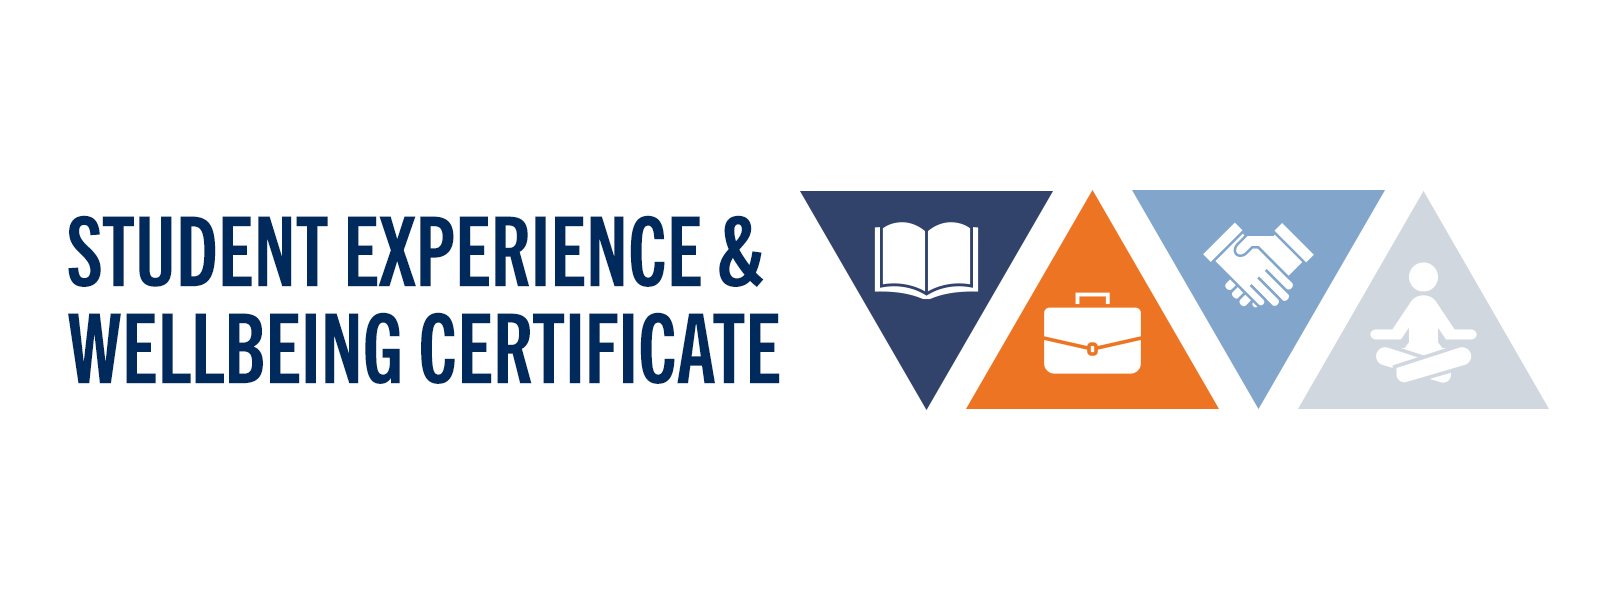 Student experience and wellbeing certificate